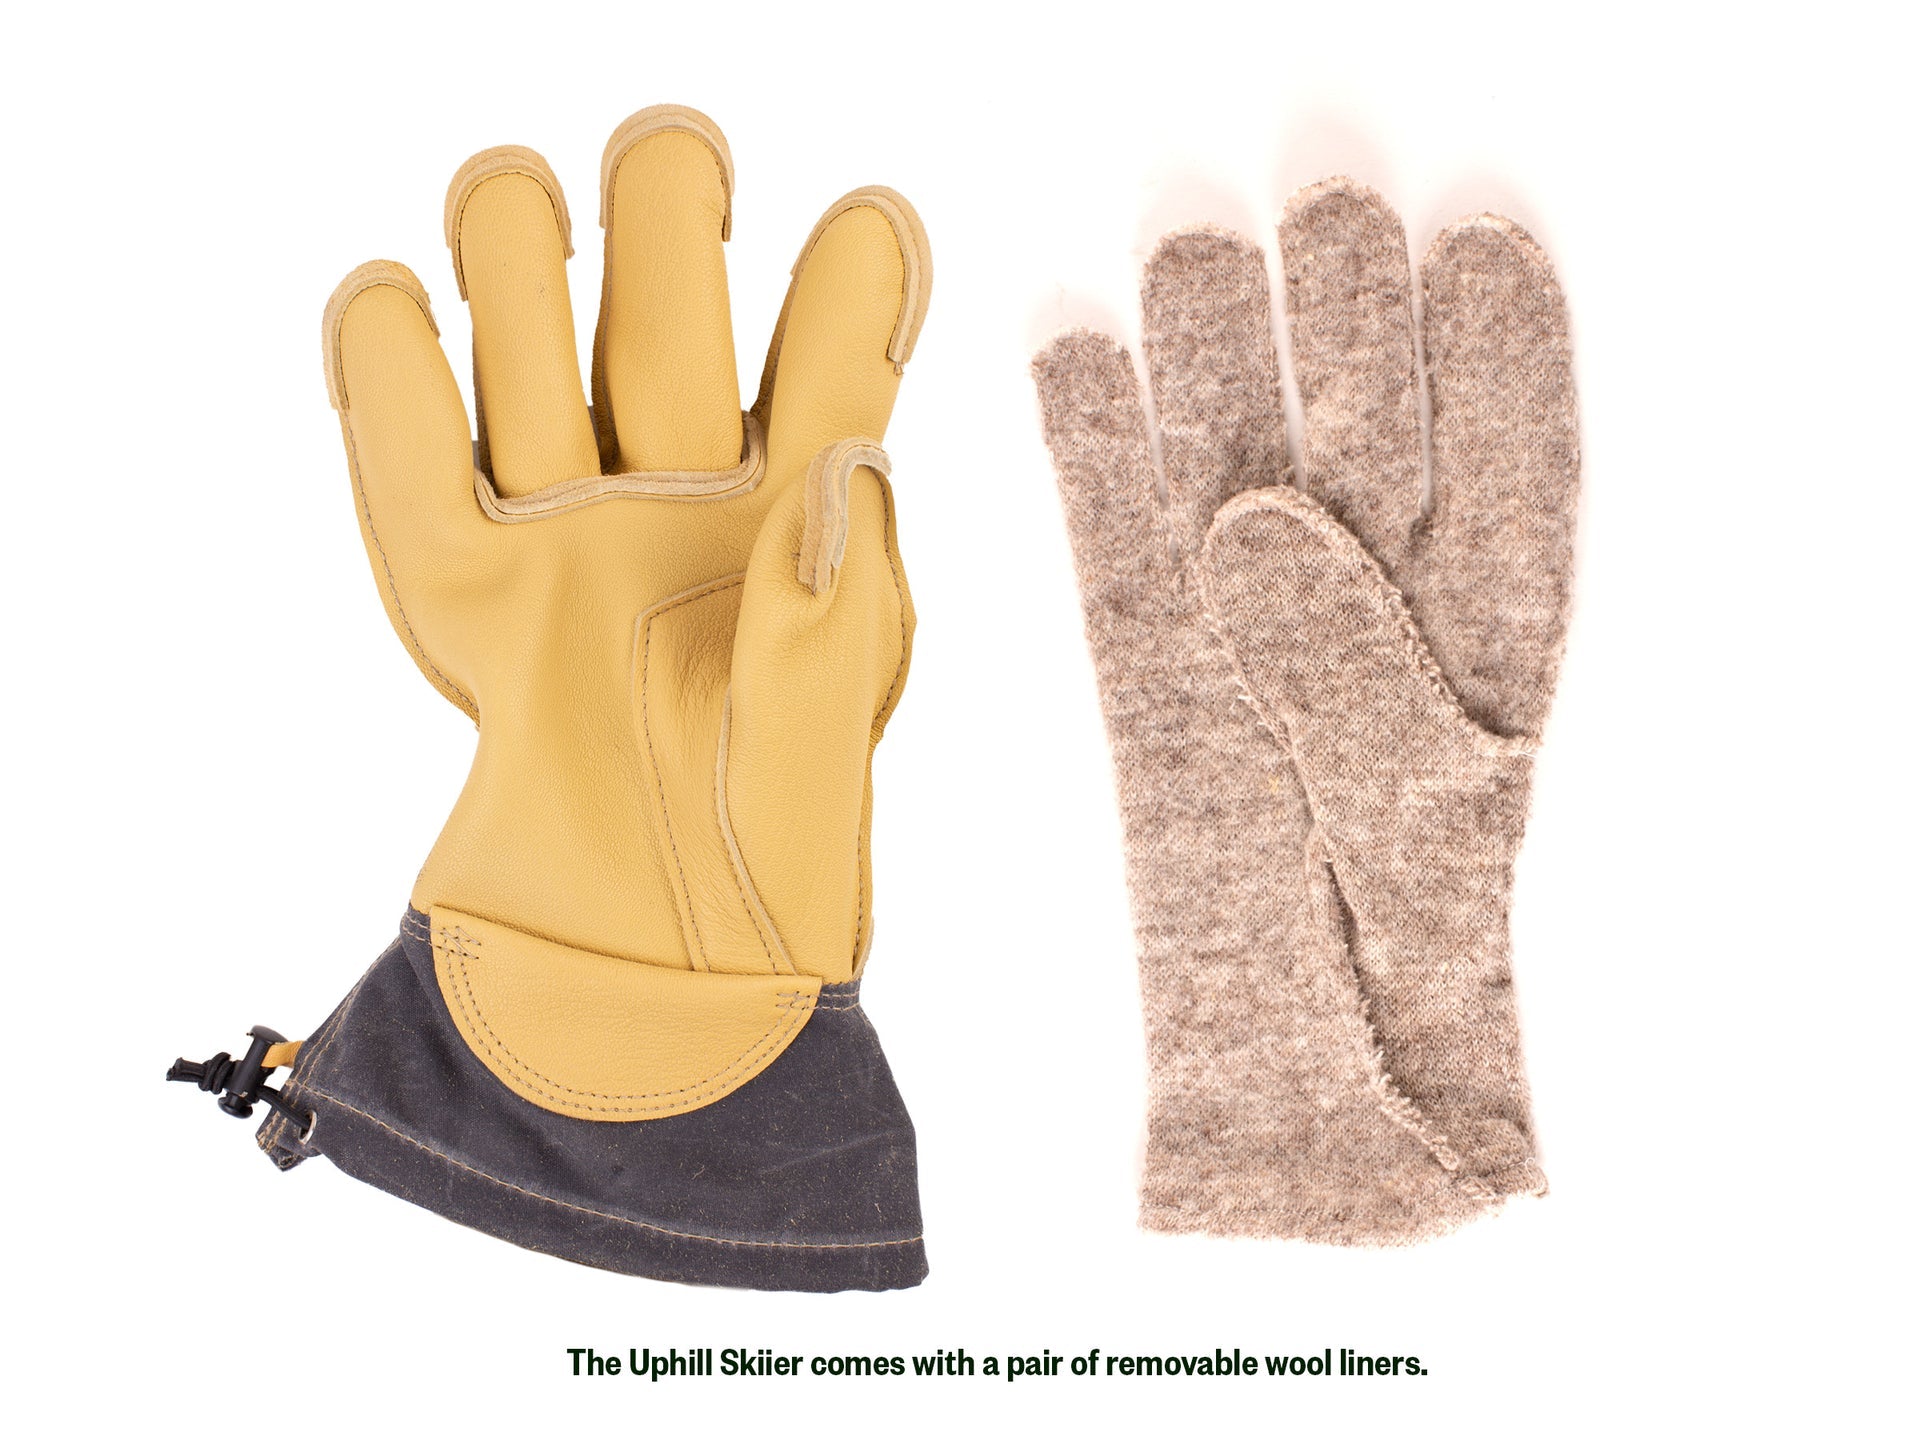 Vermont Glove Uphill Skier - Onion River Outdoors